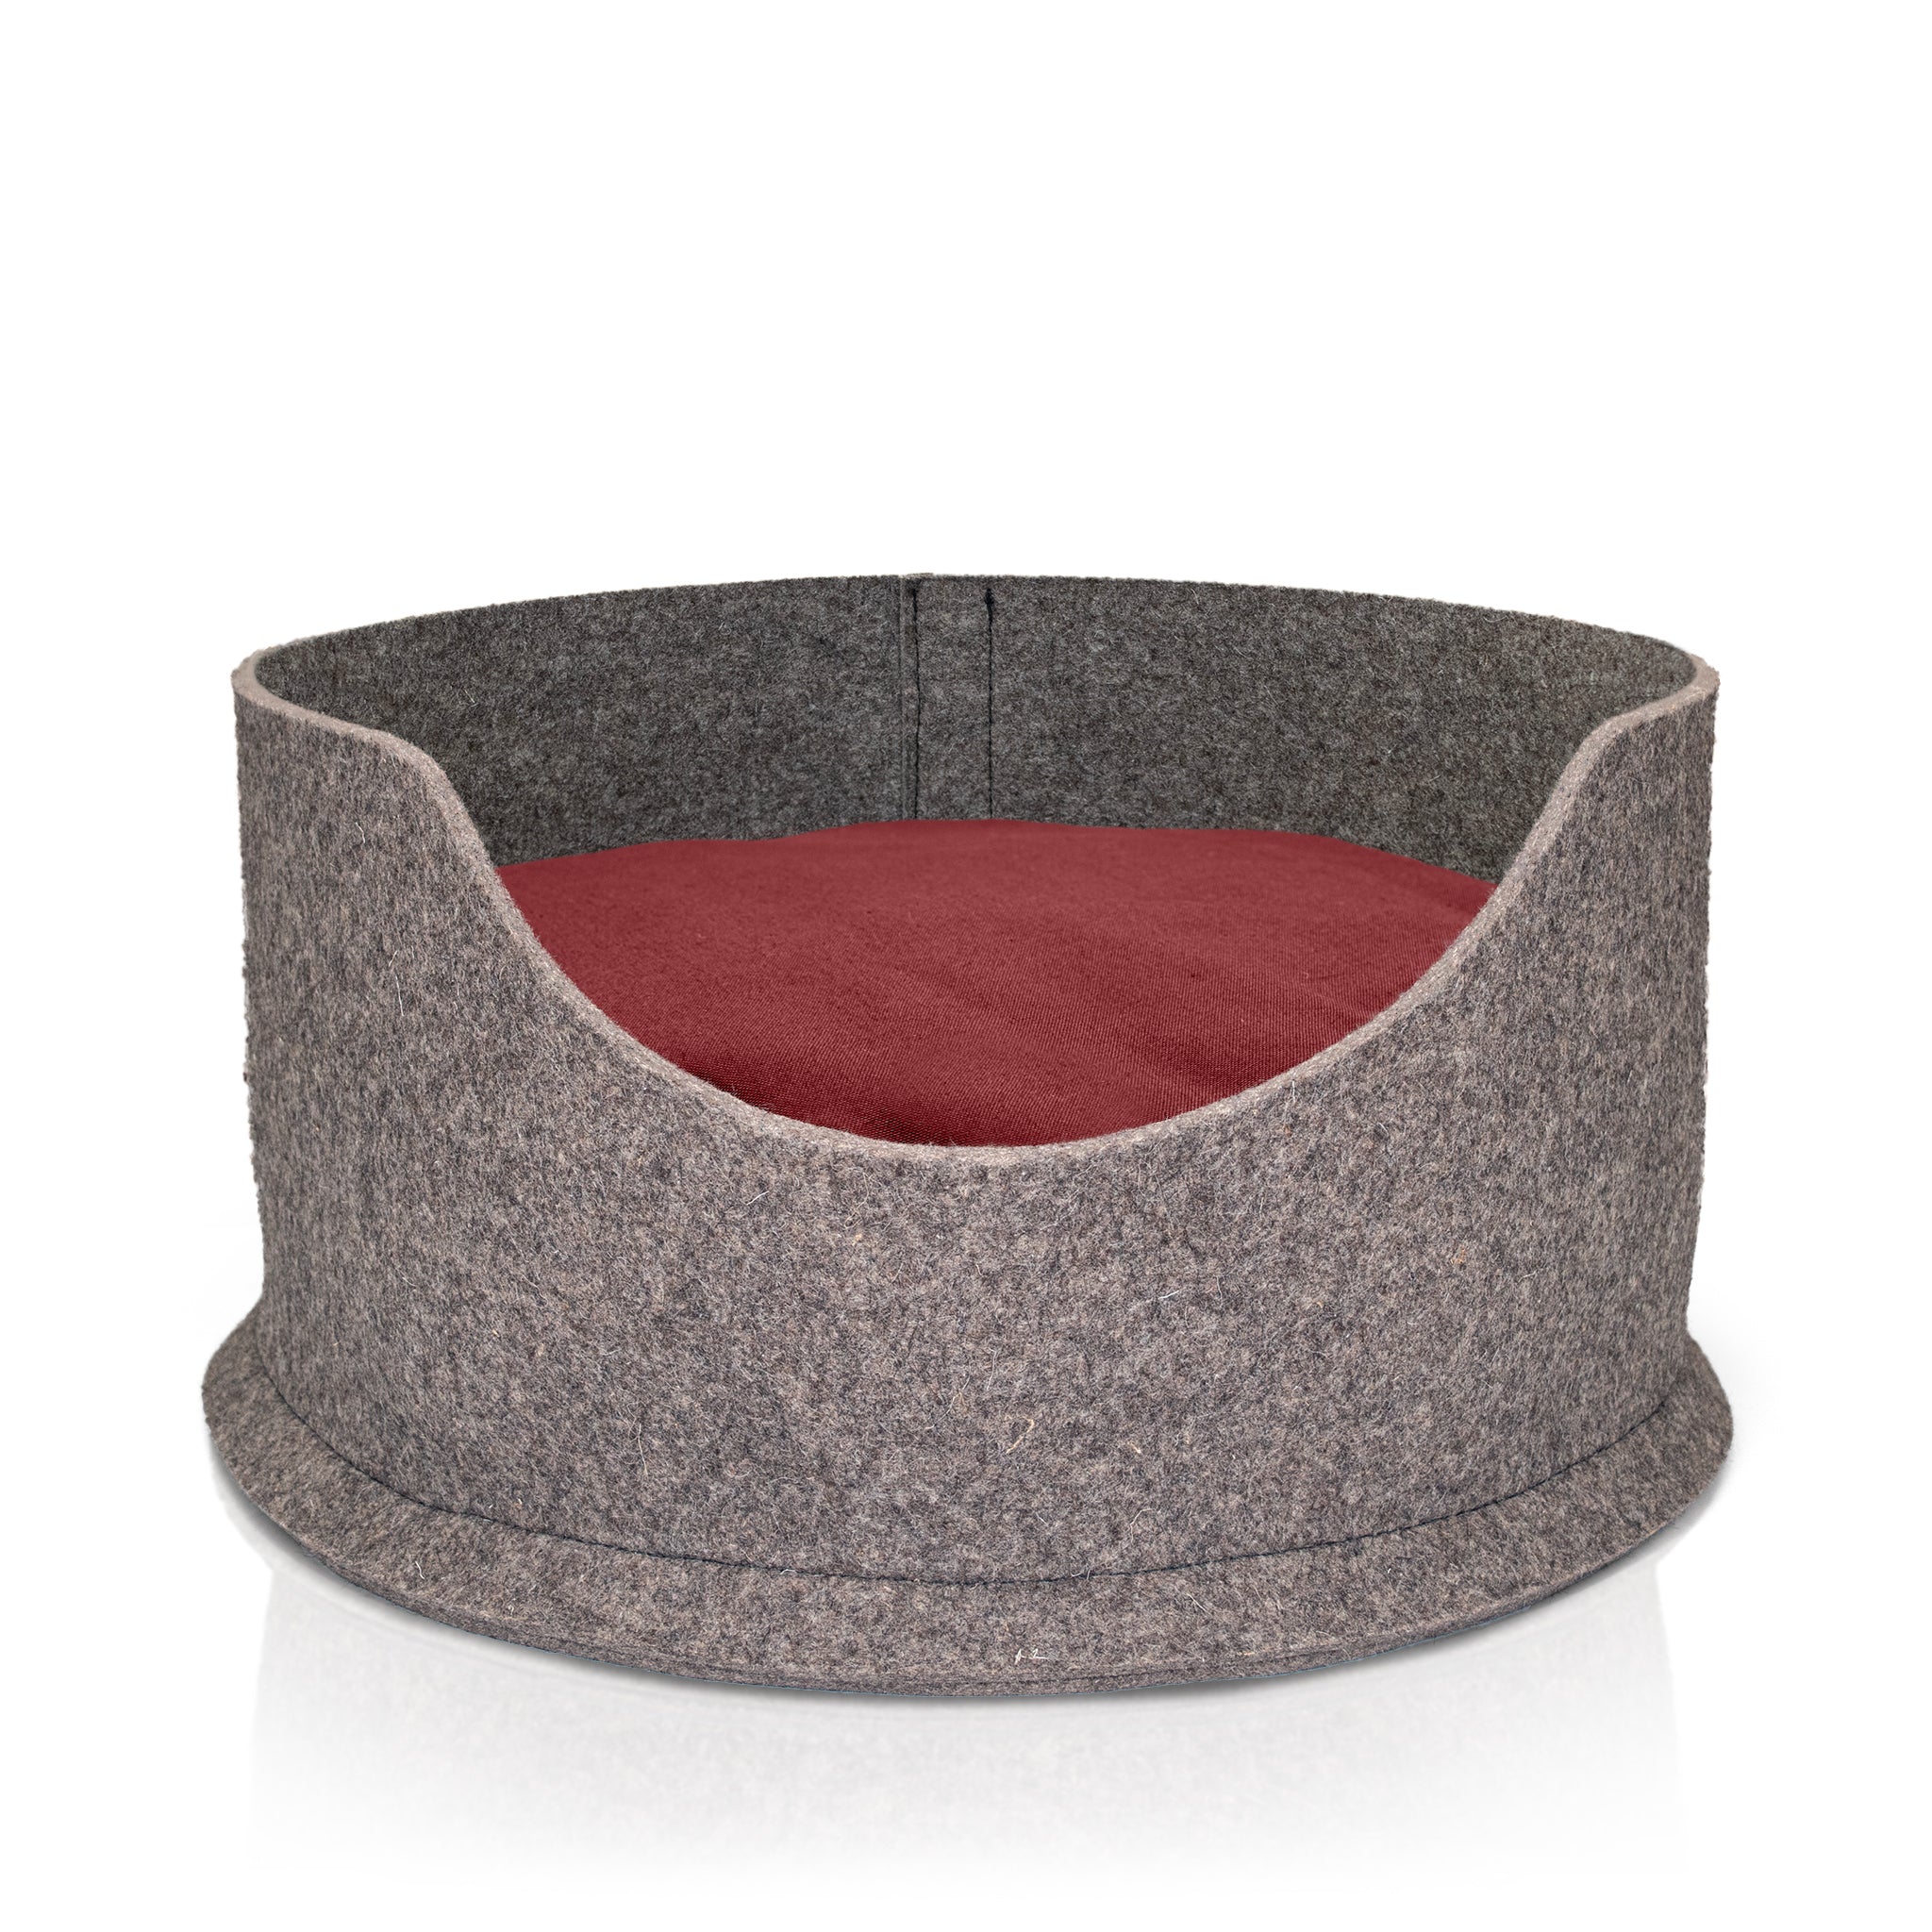 Compostable Felt Dog Pet Bed with Red Cushion